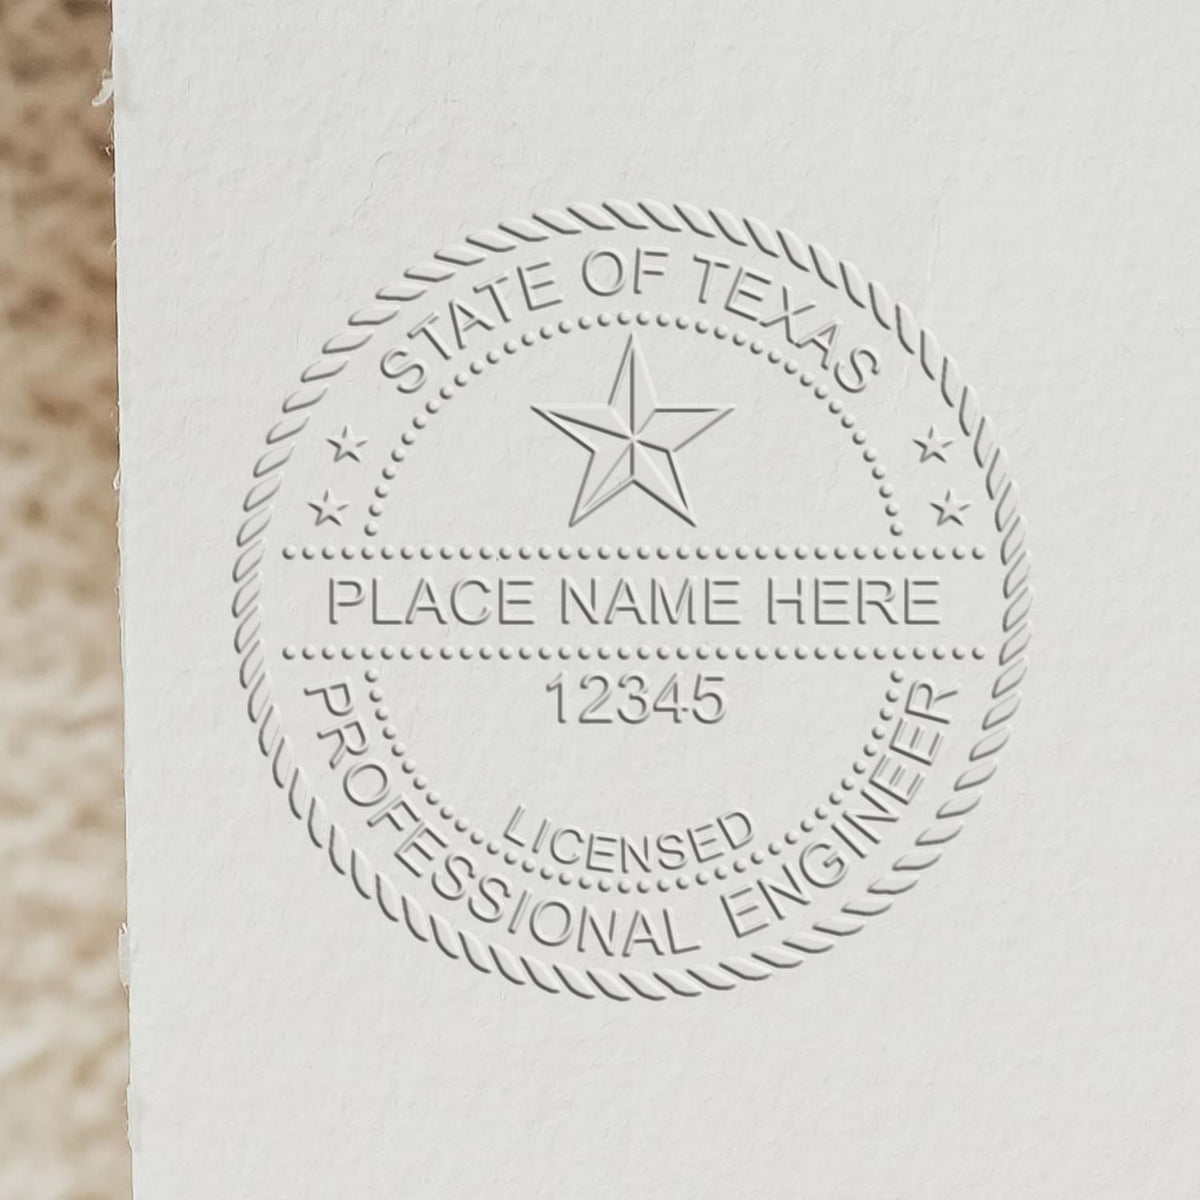 The Gift Texas Engineer Seal stamp impression comes to life with a crisp, detailed image stamped on paper - showcasing true professional quality.